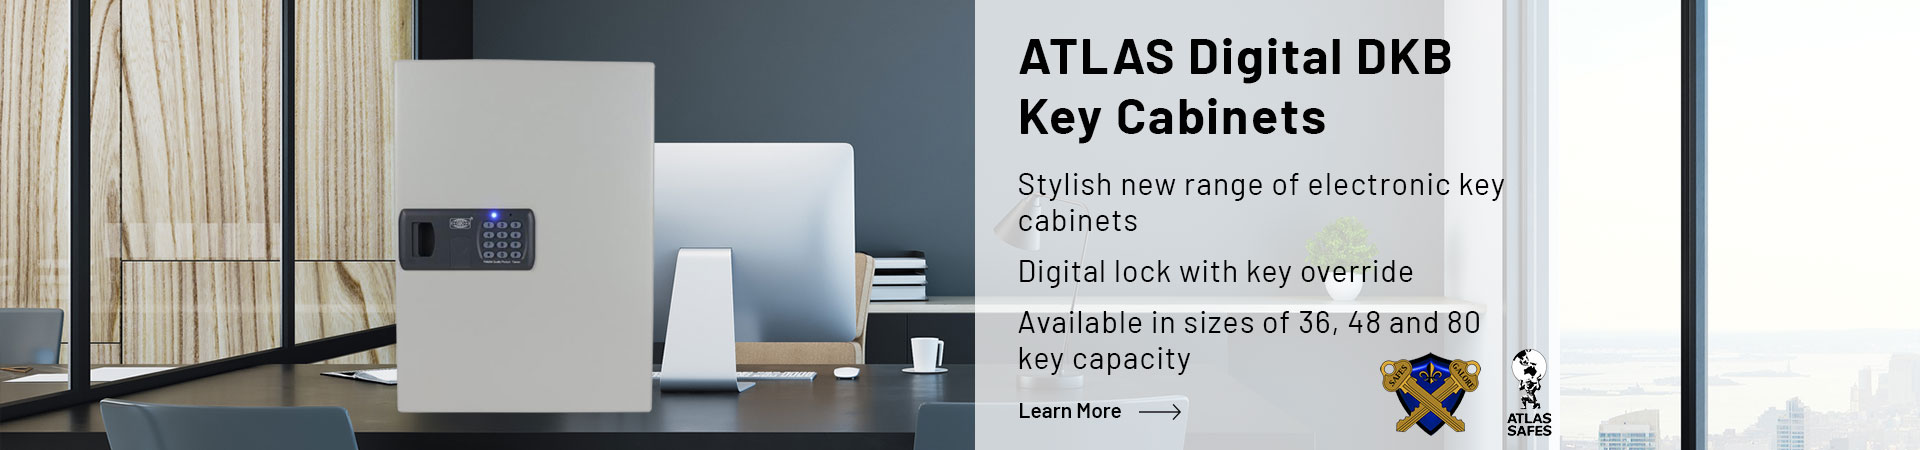 Learn more about the Atlas Digital DKB Key Cabinets
Stylish new range of electronic key cabinets